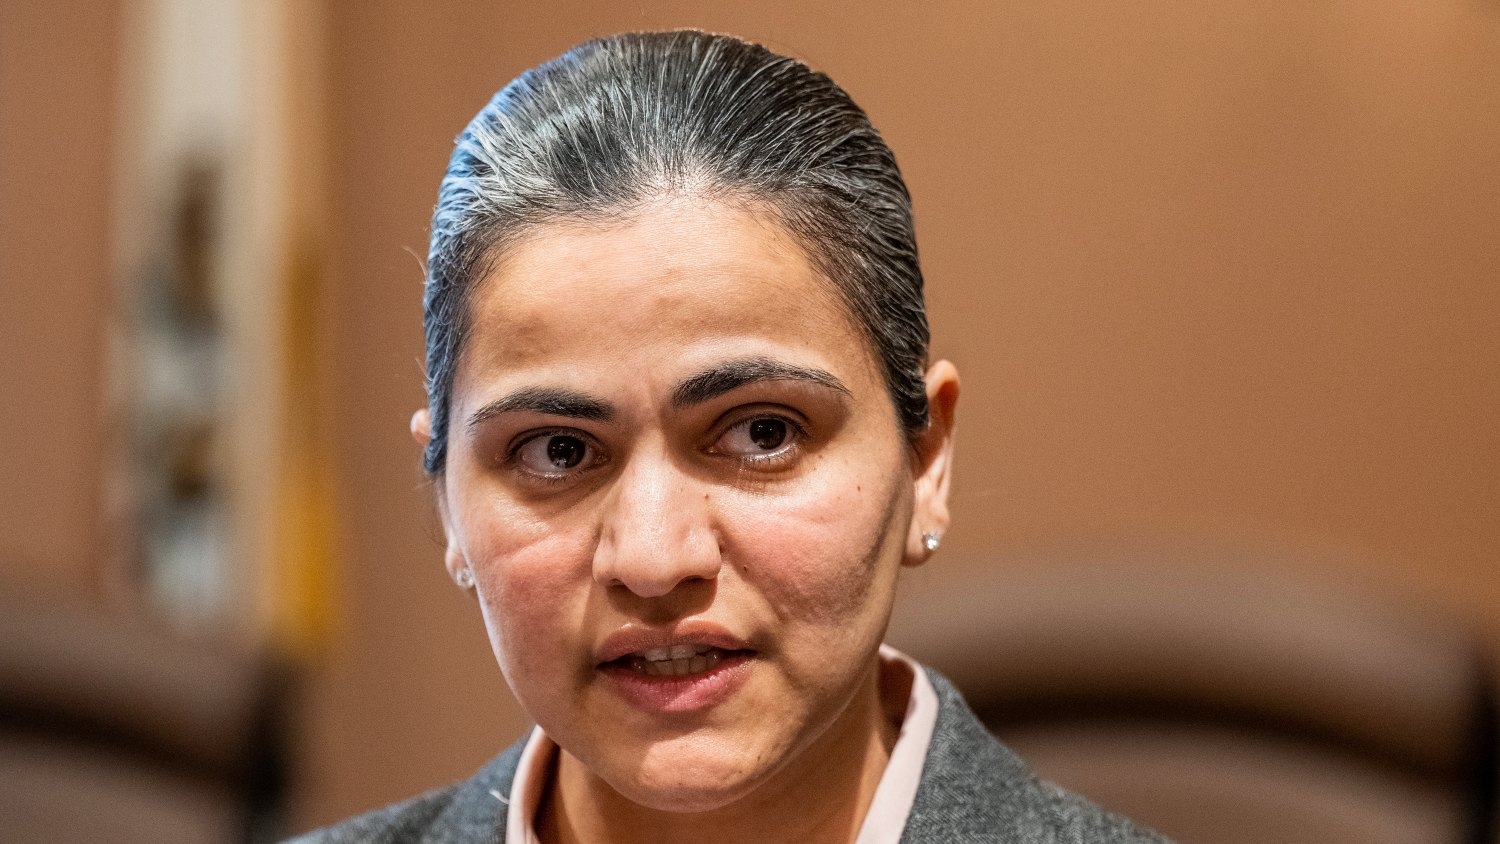 Aisha Wahab proposes a bill which adds caste as a protected category in the state’s anti-discrimination laws, in Sacramento, California on 22 March 2023